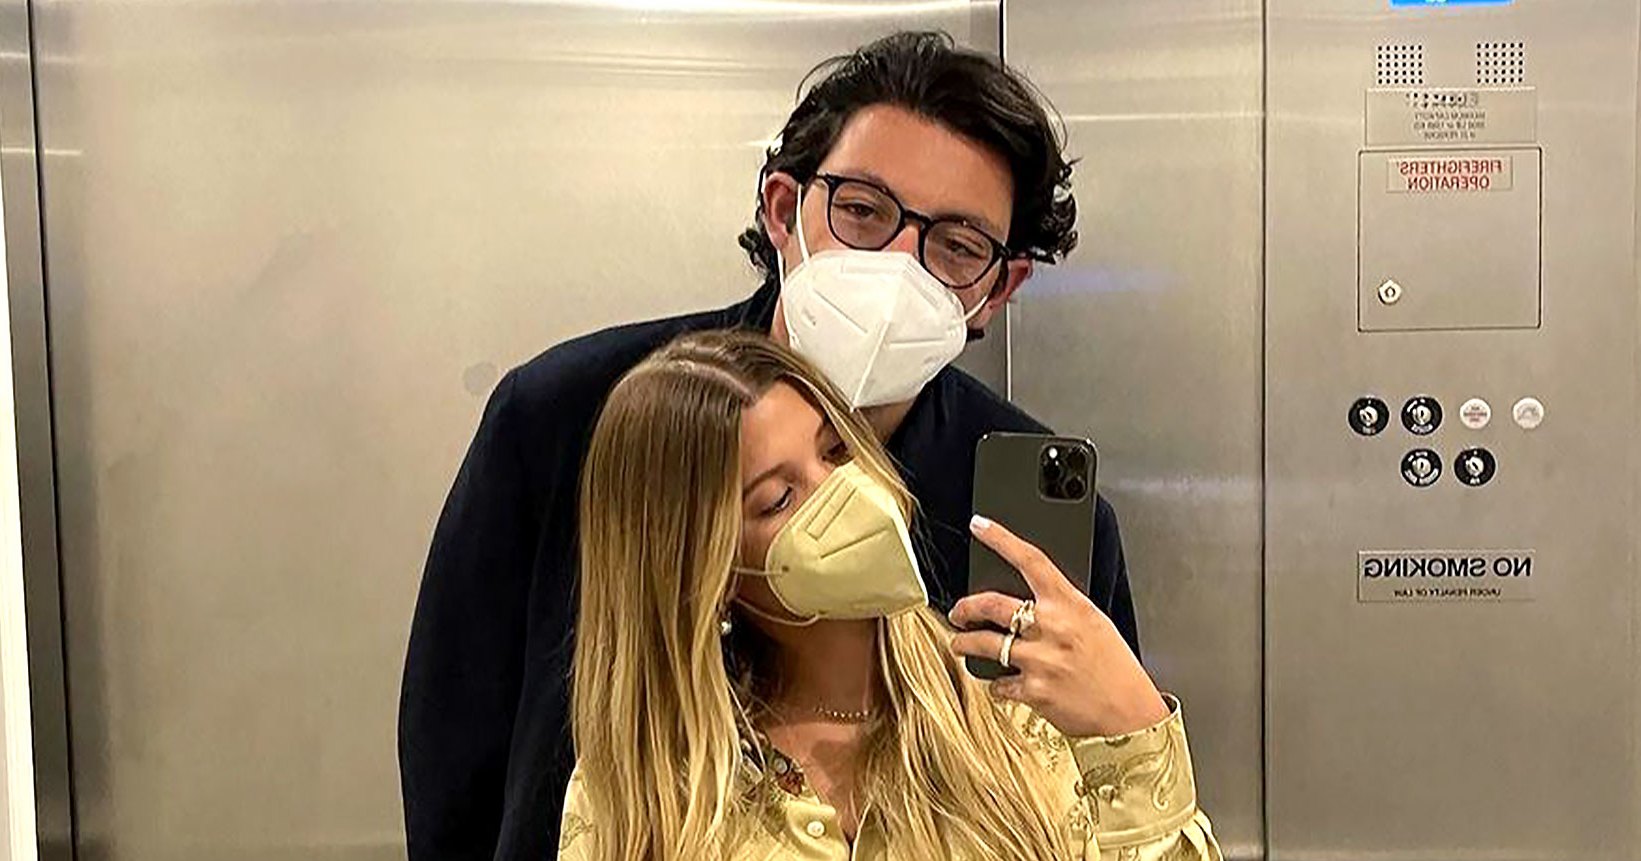 Sofia Richie and Elliot Grainge Are Instagram Official: 5 Things to Know